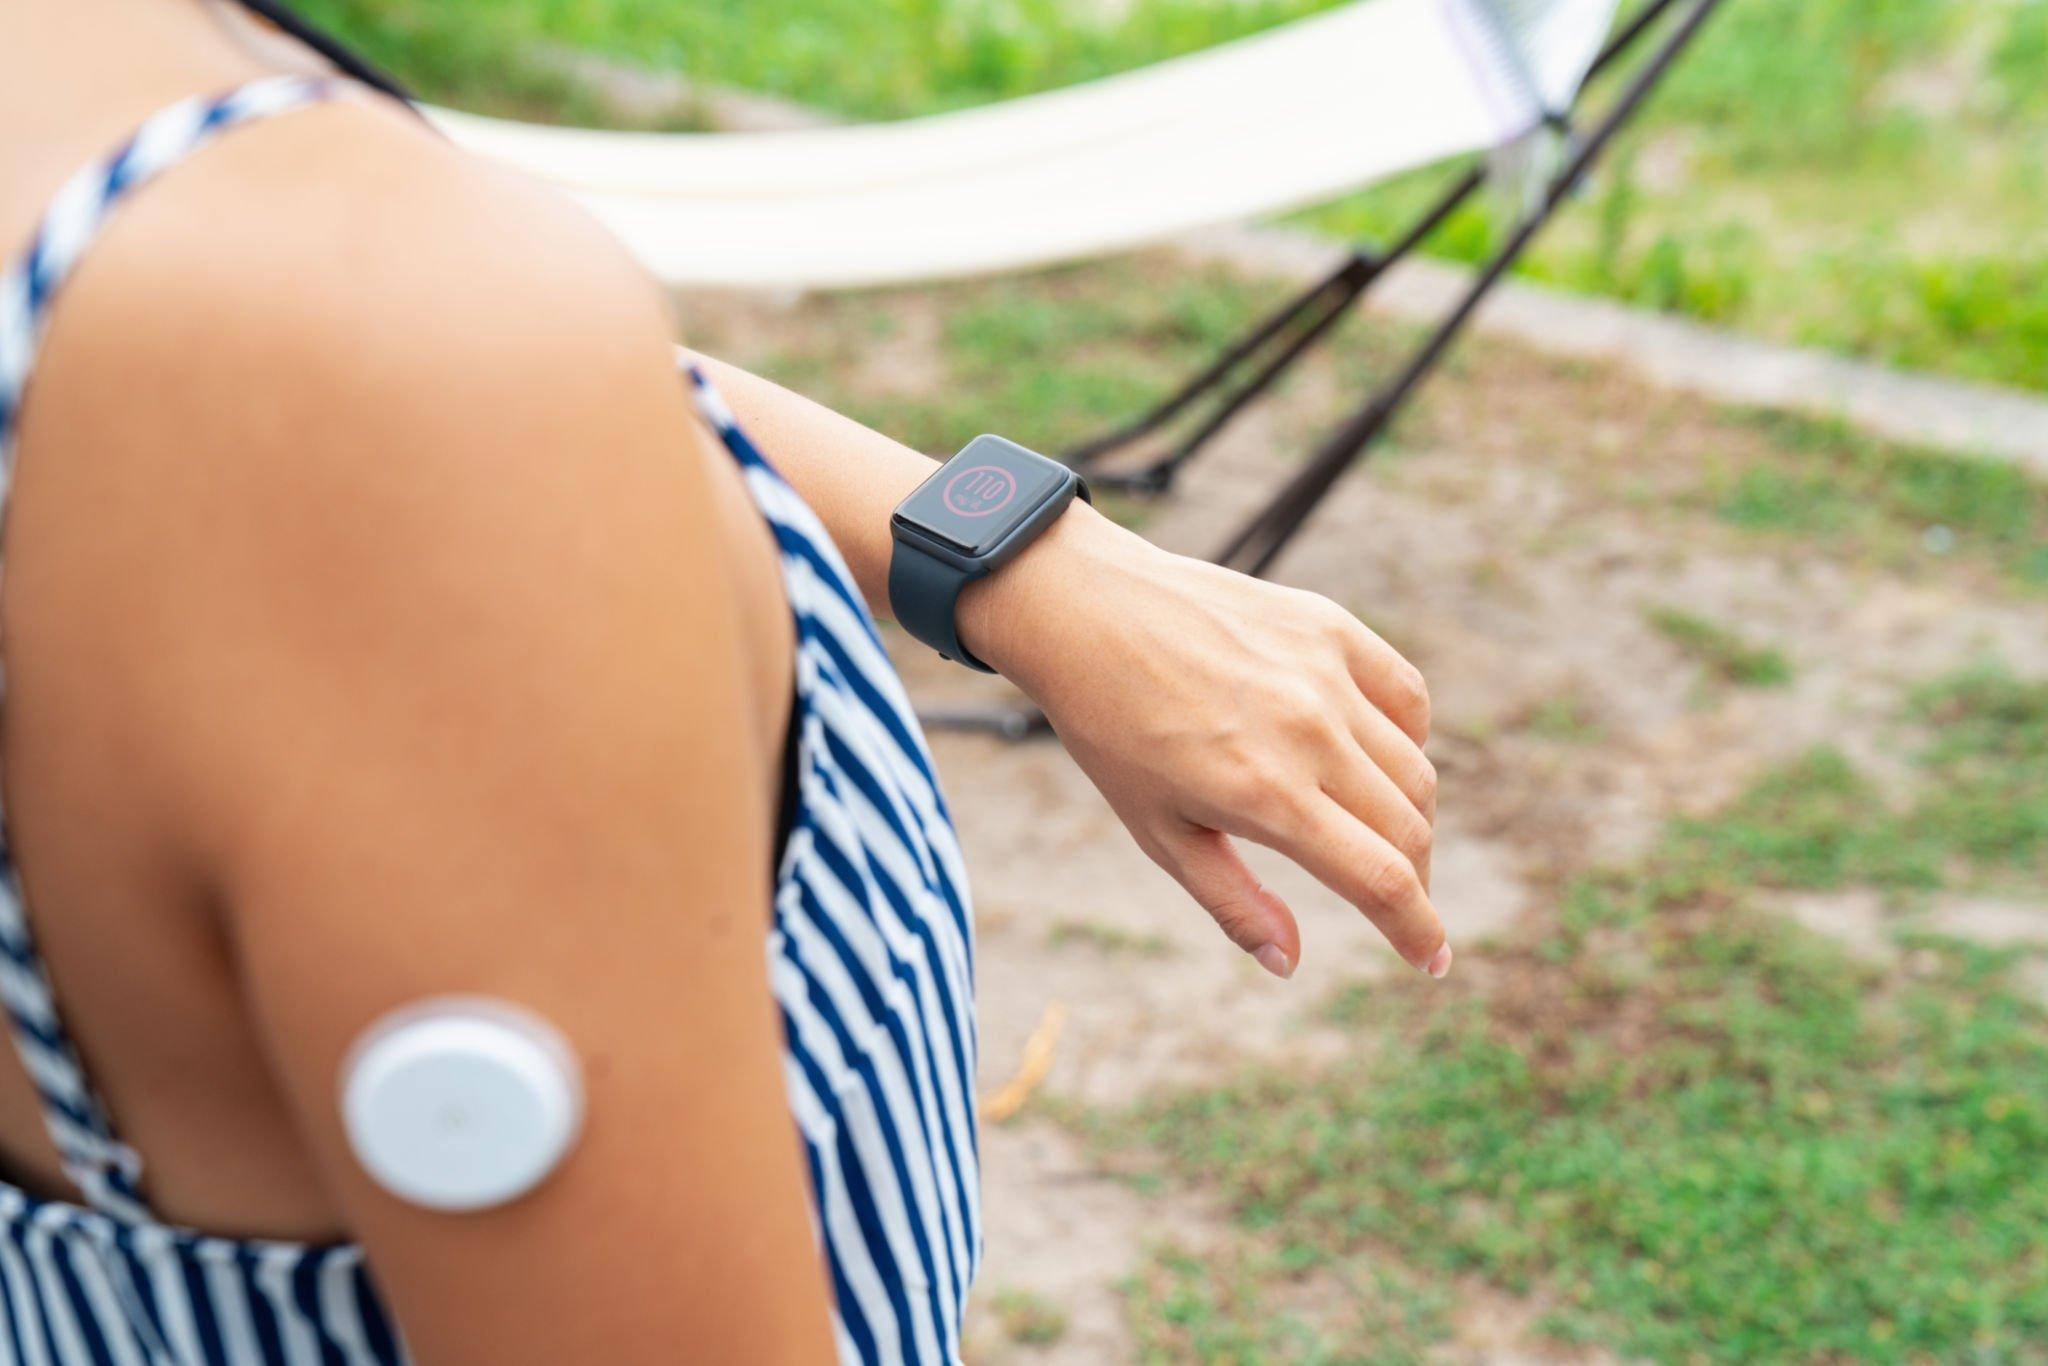 A person wearing a CGM device on their body and checking their smartwatch to remotely monitor blood sugar